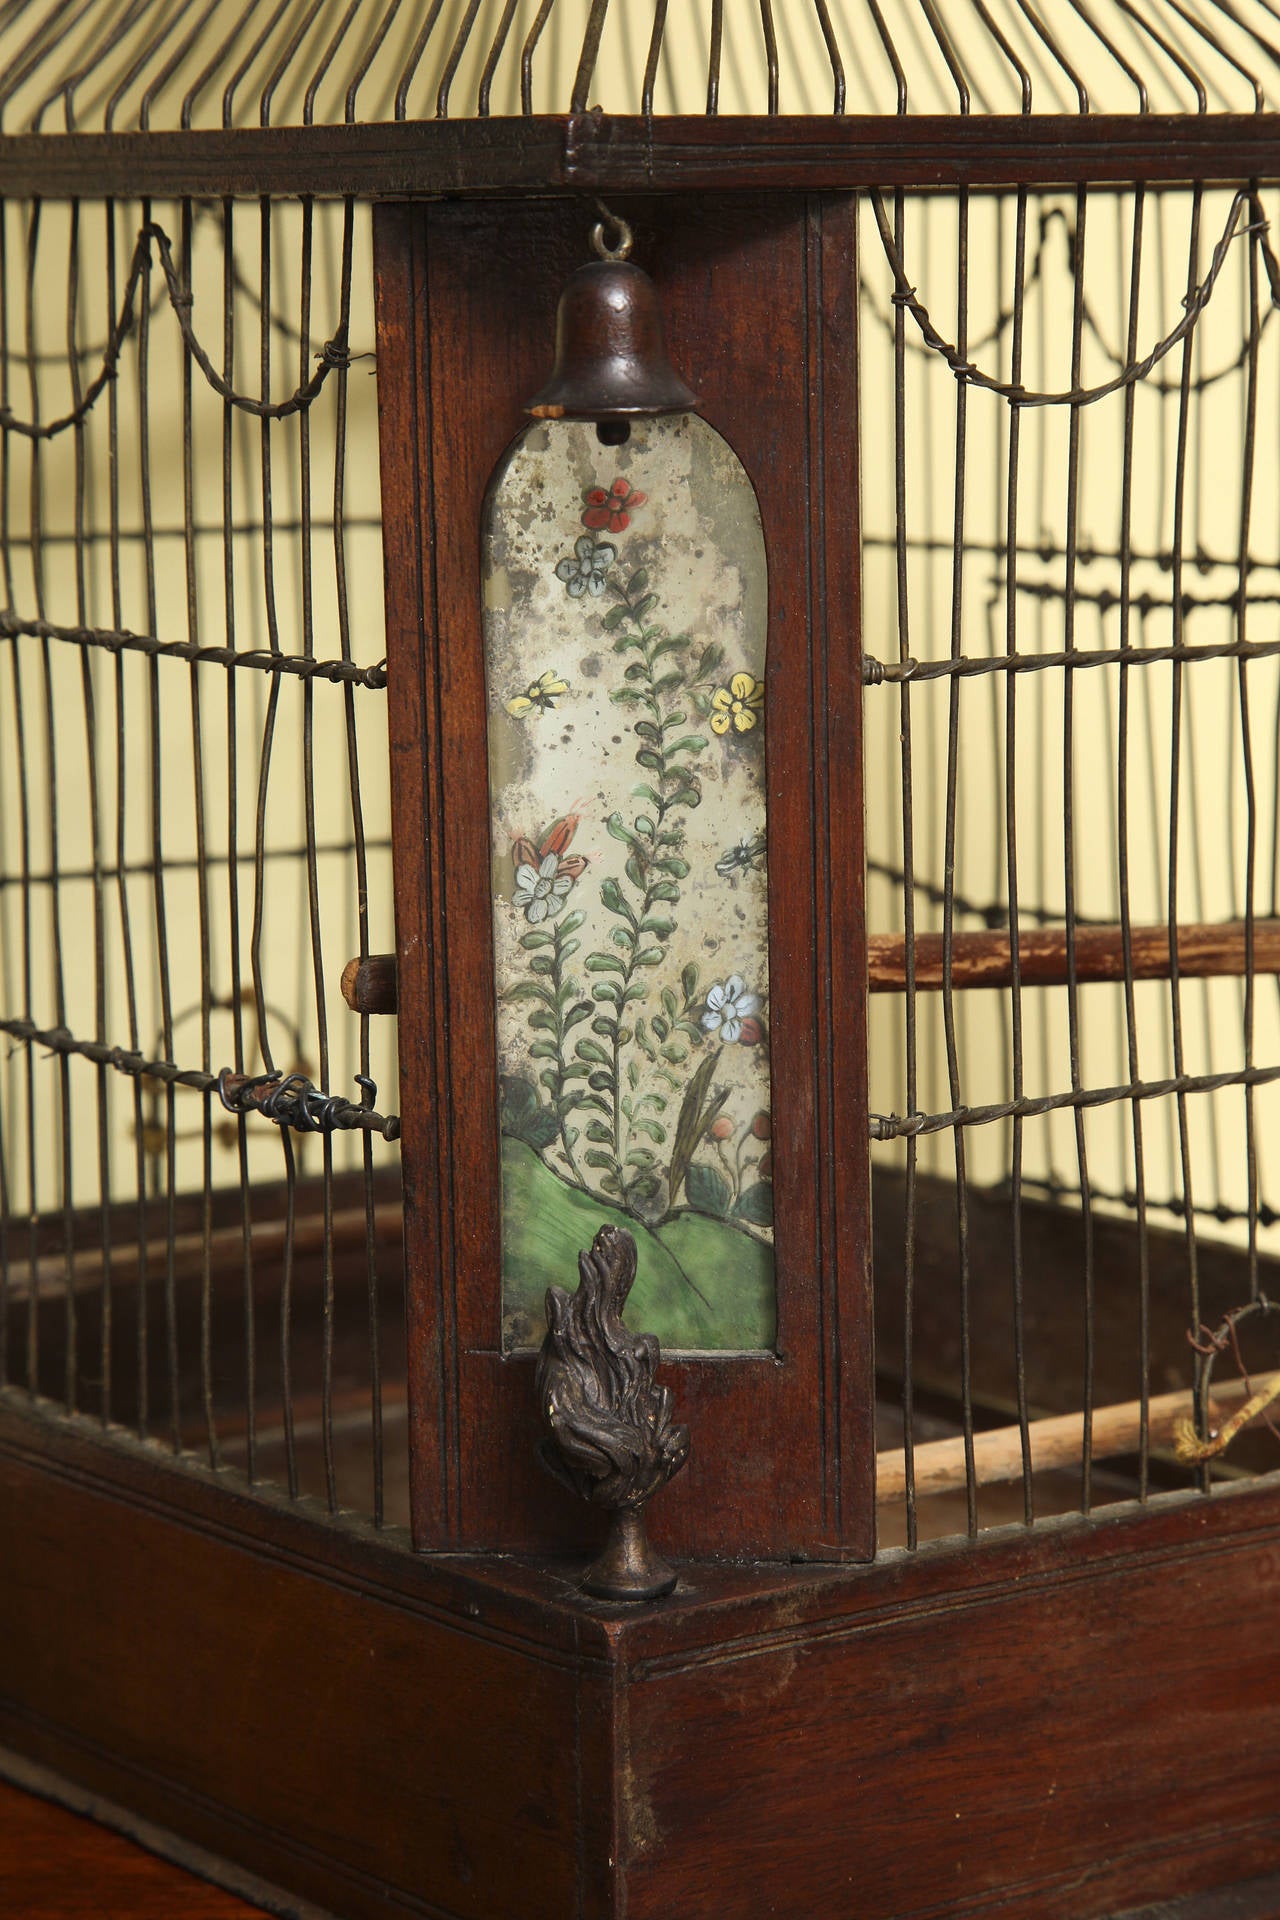 Rare Regency Chinoiserie Pagoda Form Brass and Mahogany Birdcage, the roof having pendant bells at each corner above canted reverse glass panels decorated with flowering branches. English circa 1820.